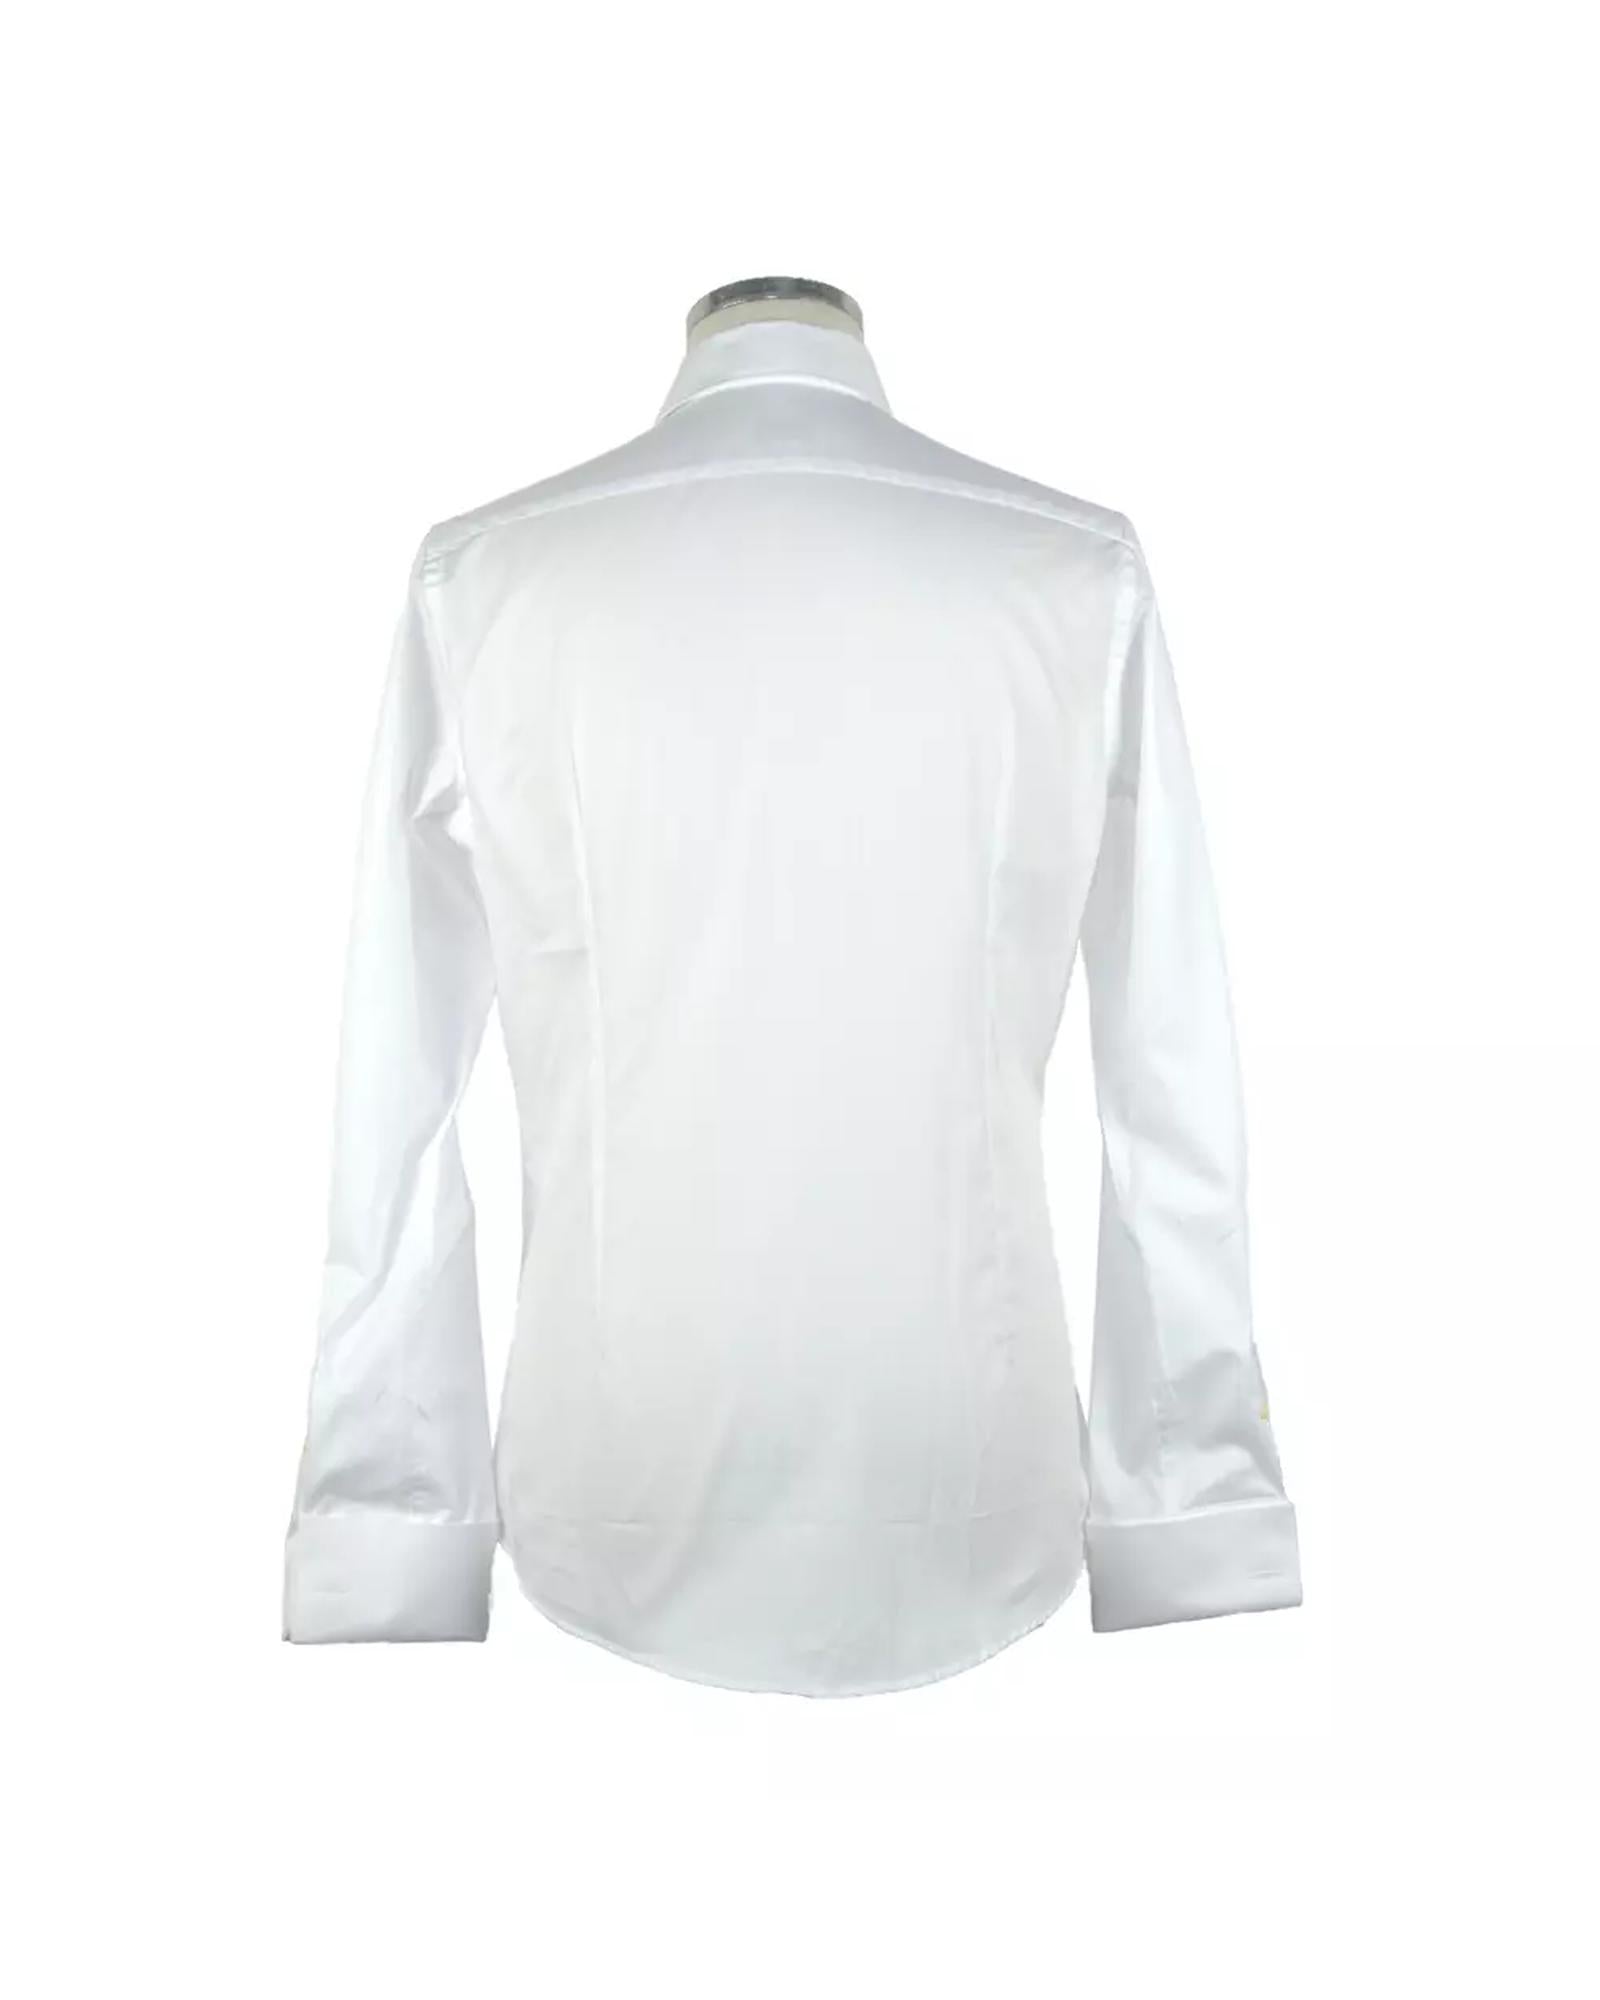 Cotton Ceremony Shirt with French Collar and Button Closure 38 IT Men